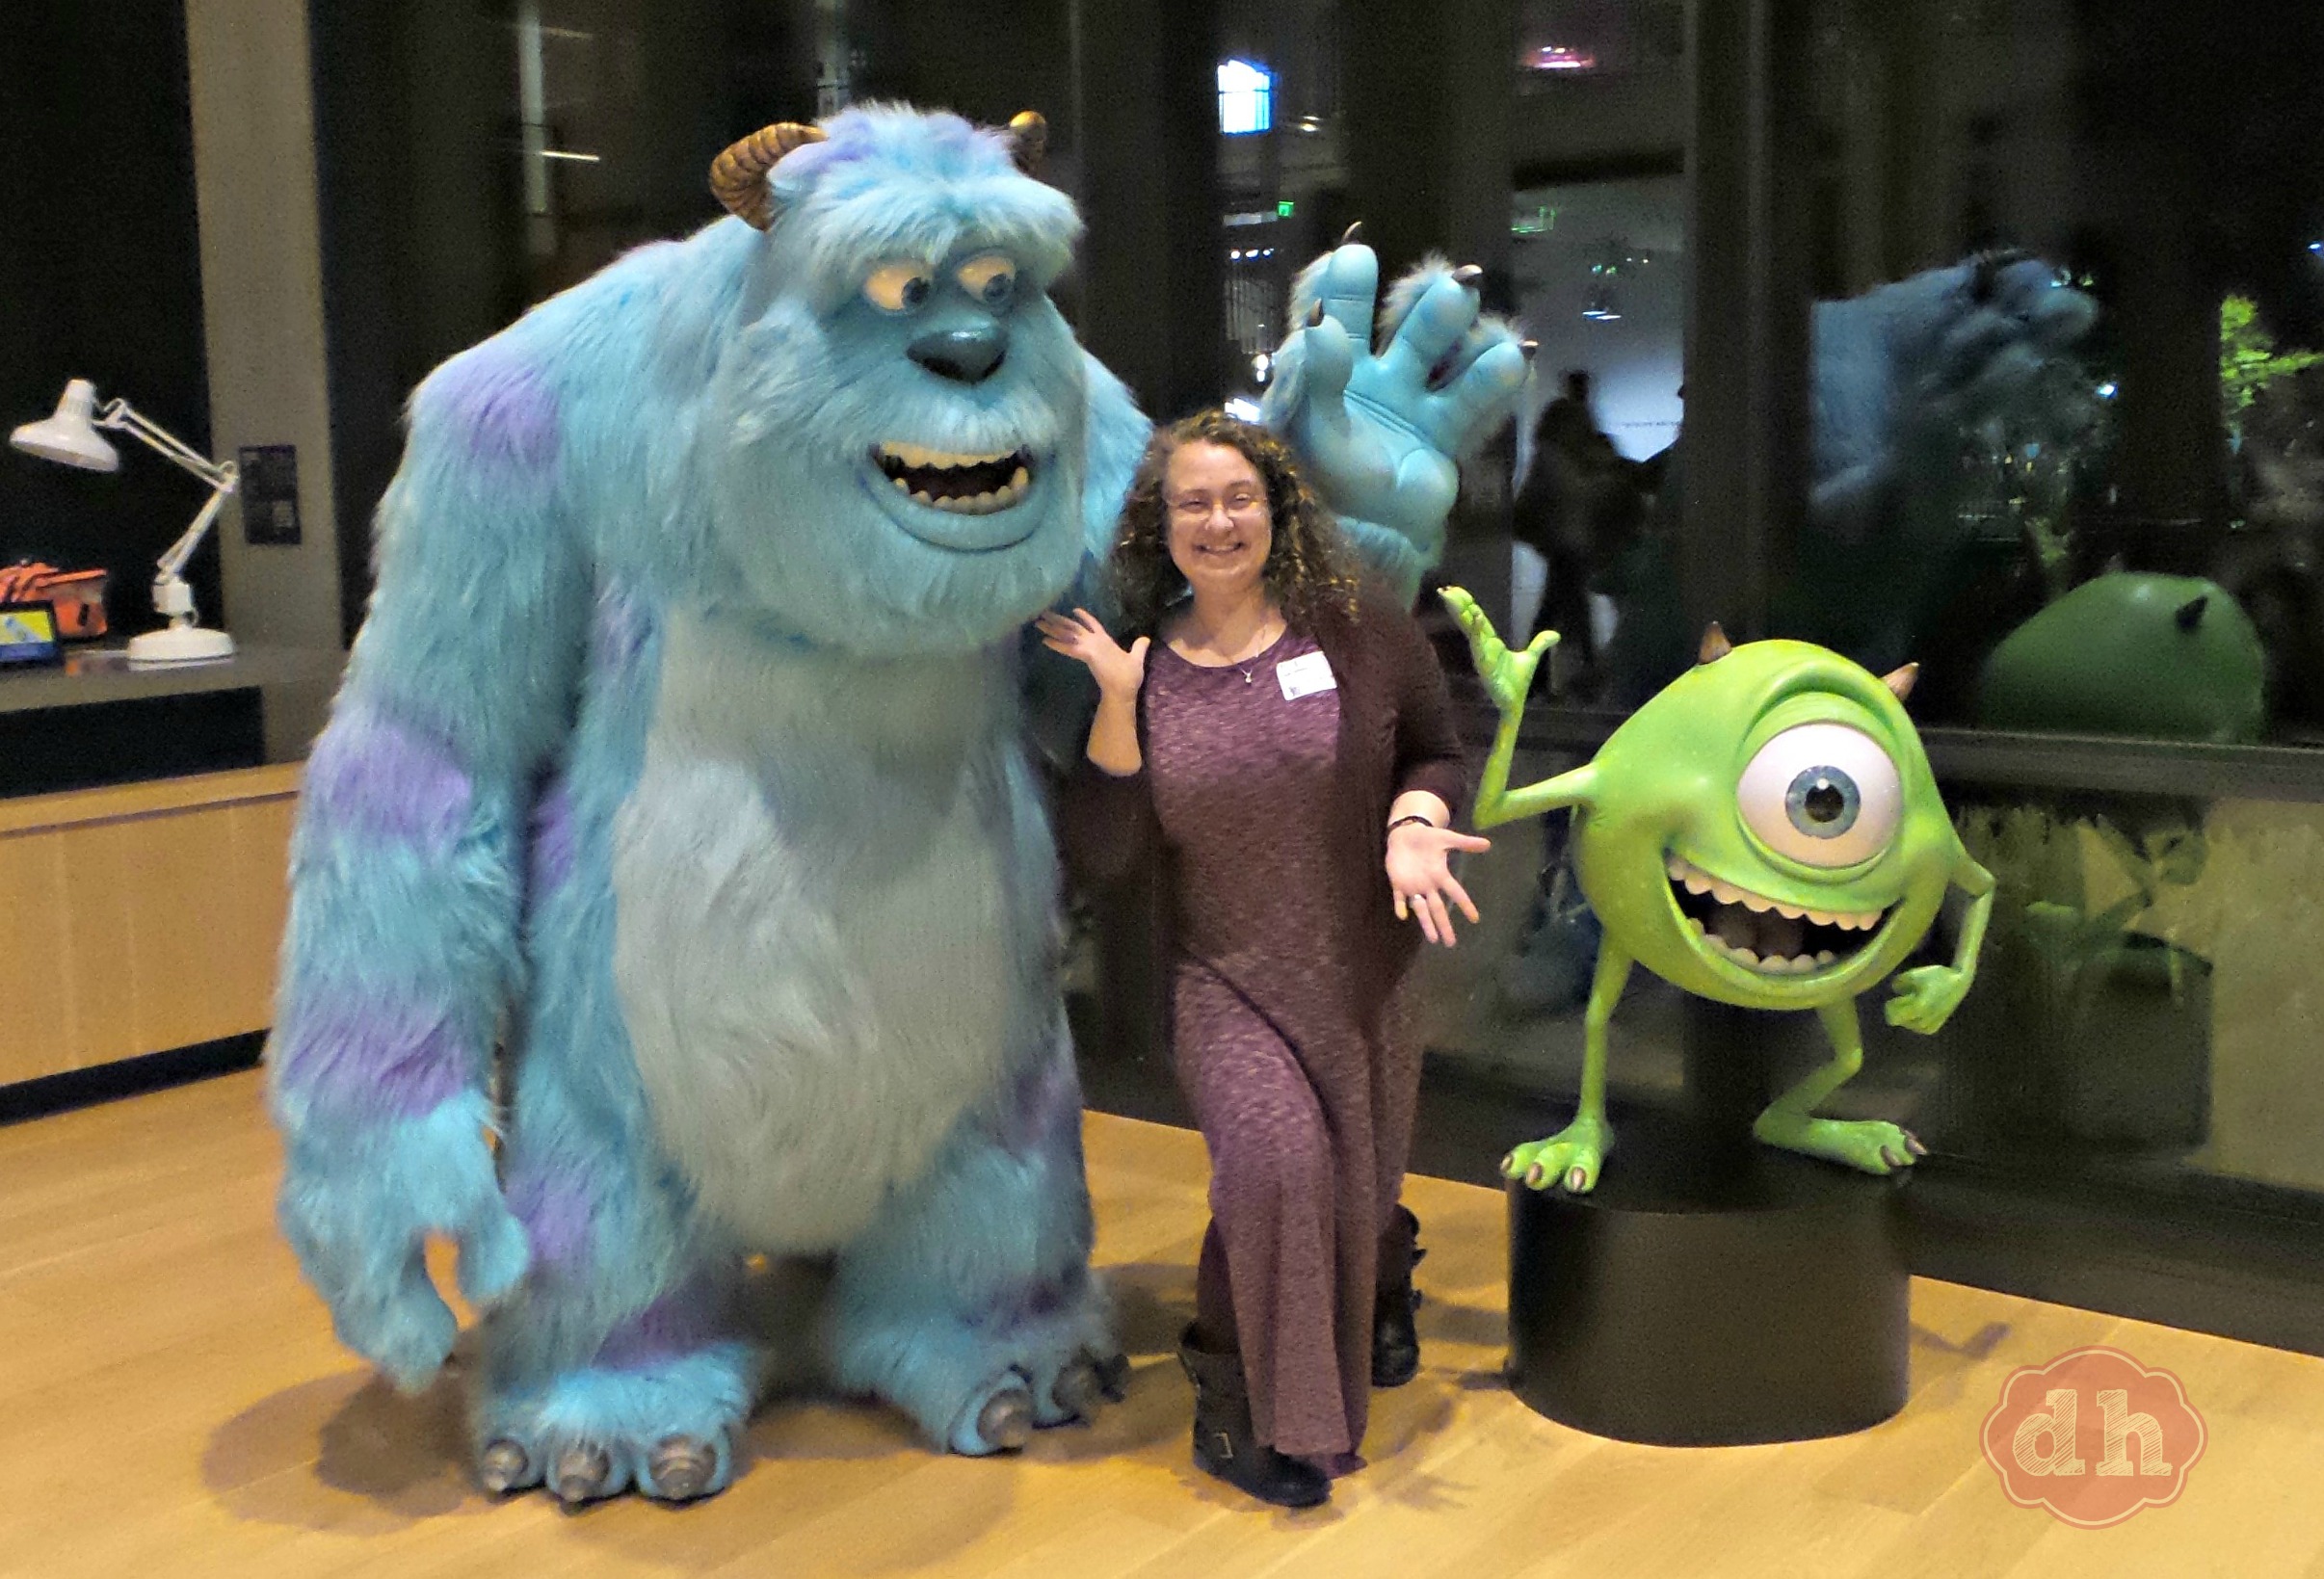 My Day at Pixar #InsideOutEvent